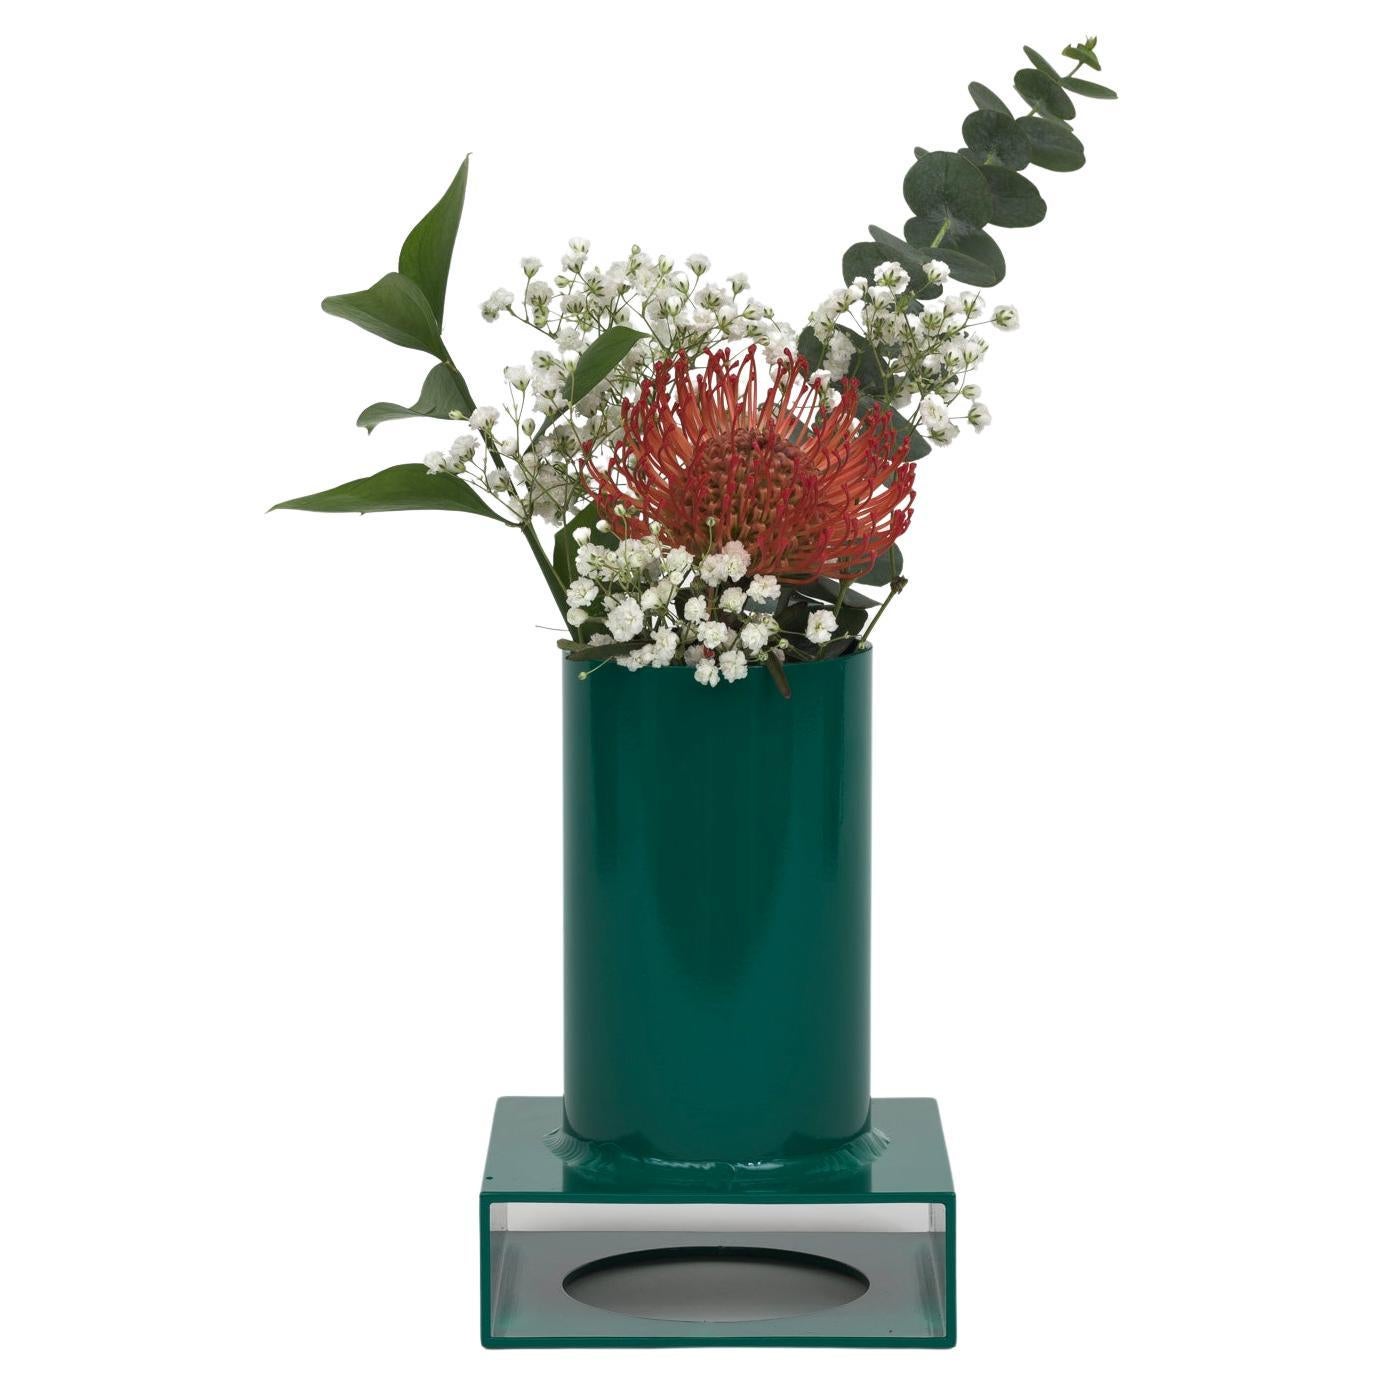 Brute Tube Vase 002 in Deep Mint Green Powder-Coated Aluminum, Limited Edition For Sale